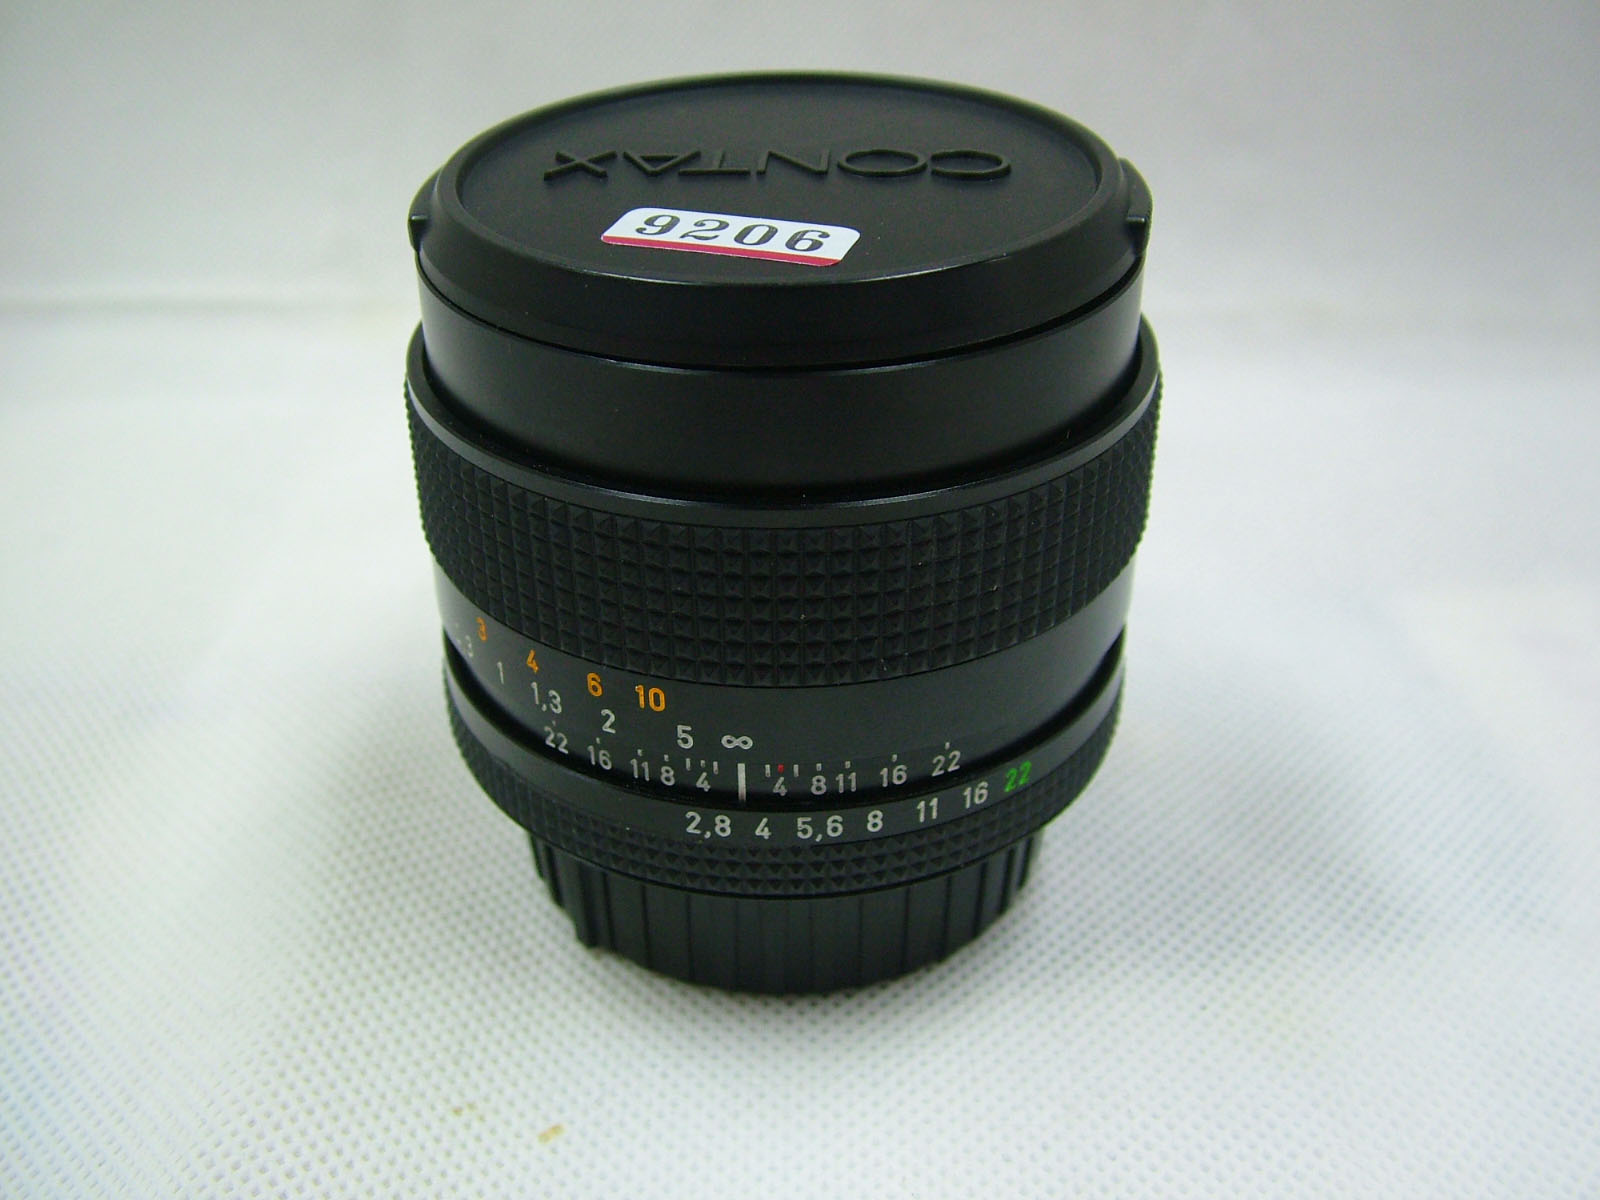   98 New CONTAIN 35/2.8MMJ has been changed to Nikon Port # 9206